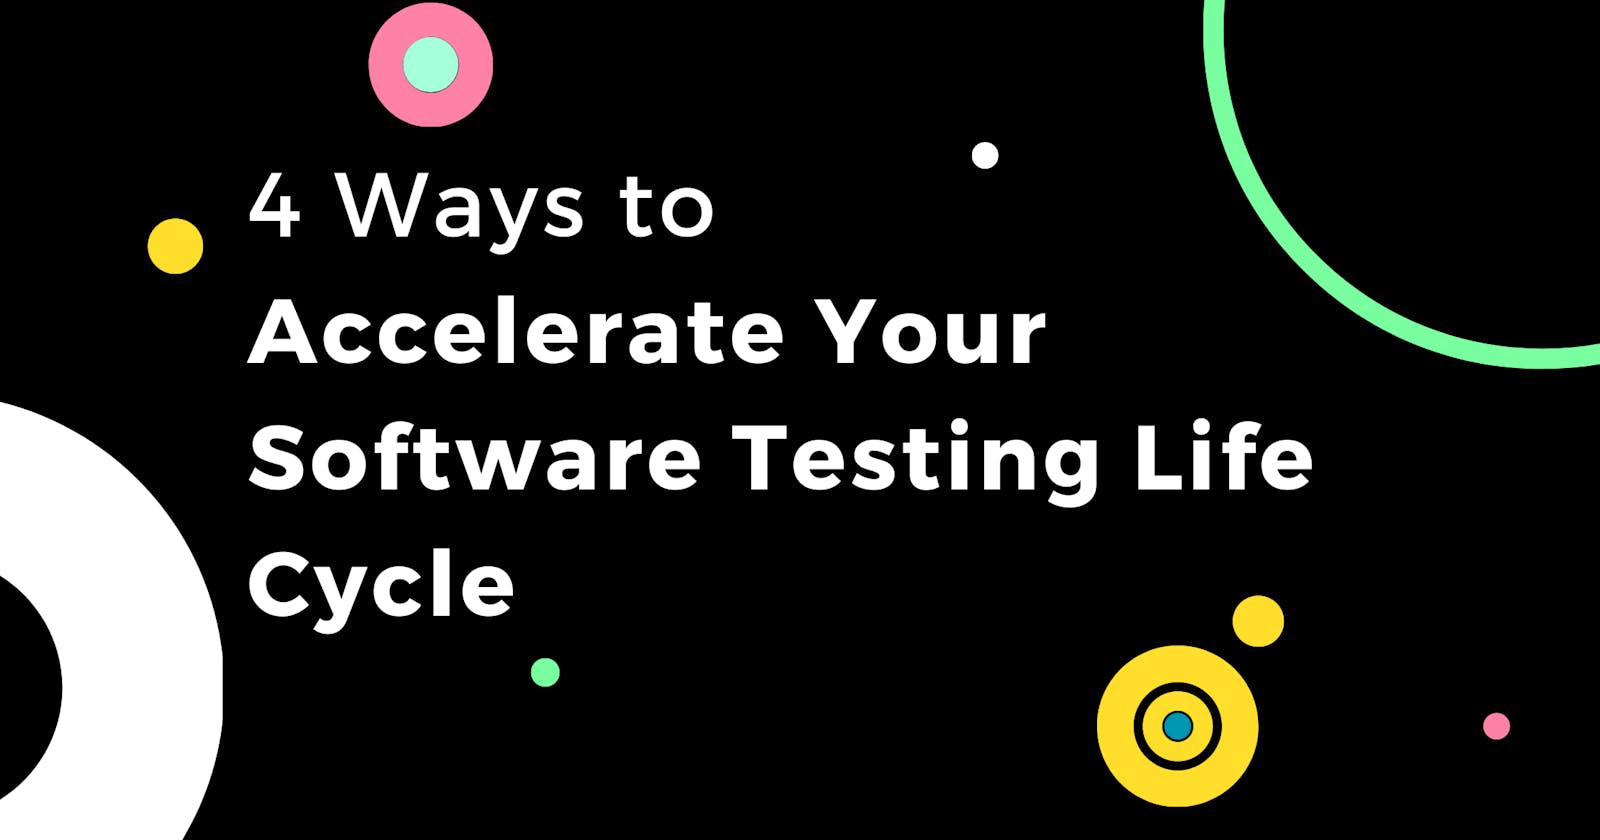 4 Ways to Accelerate Your Software Testing Life Cycle